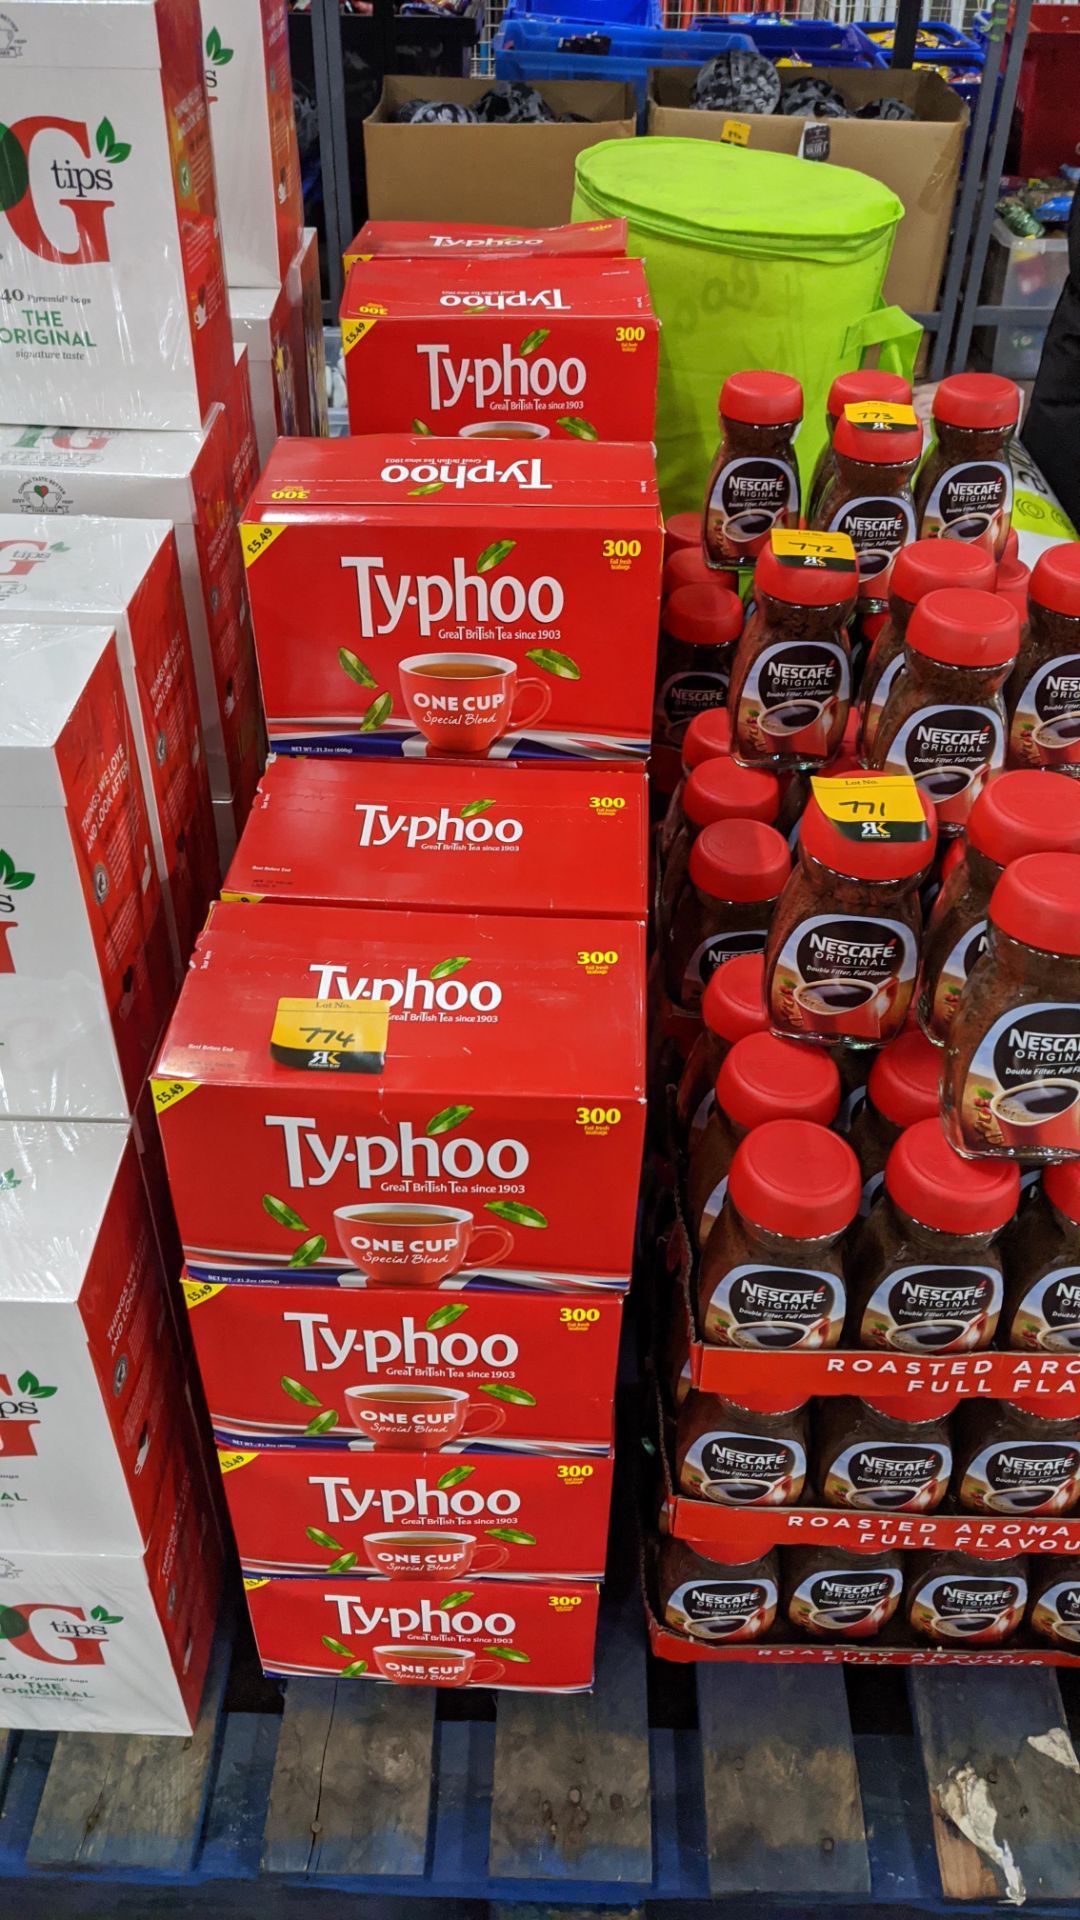 26 boxes of Typhoo Teabags, each box containing 300 teabags. IMPORTANT – DO NOT BID BEFORE READING